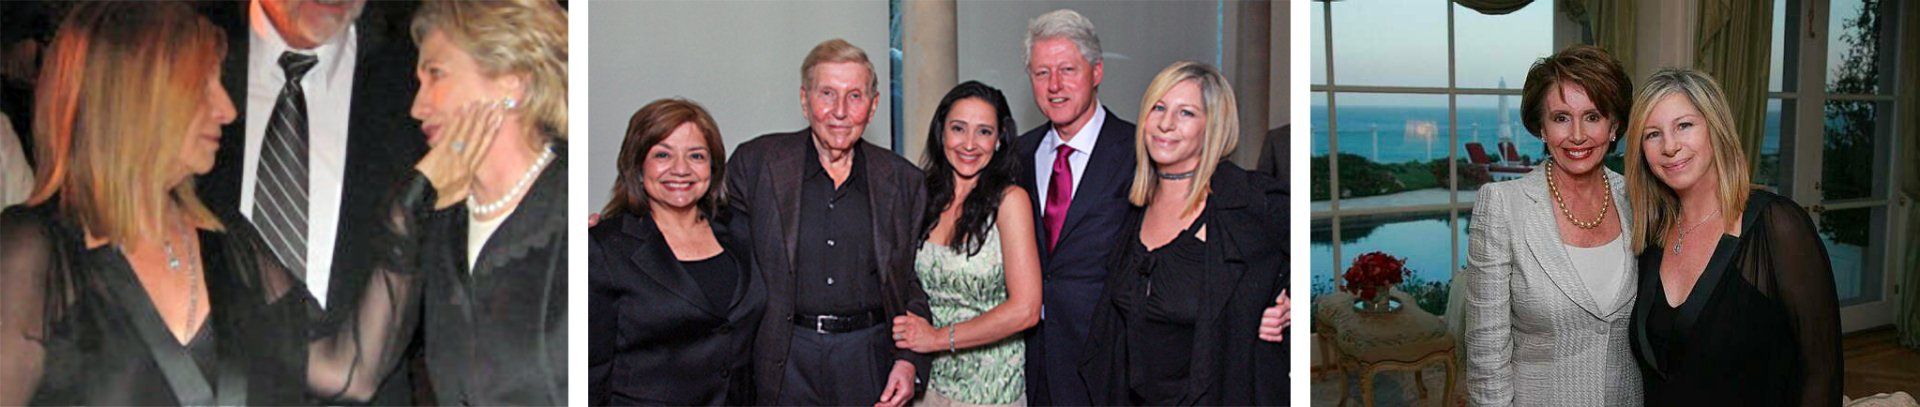 2007 fundraisers: With Hillary Clinton, Sumner Redstone and Bill Clinton, Nancy Pelosi.